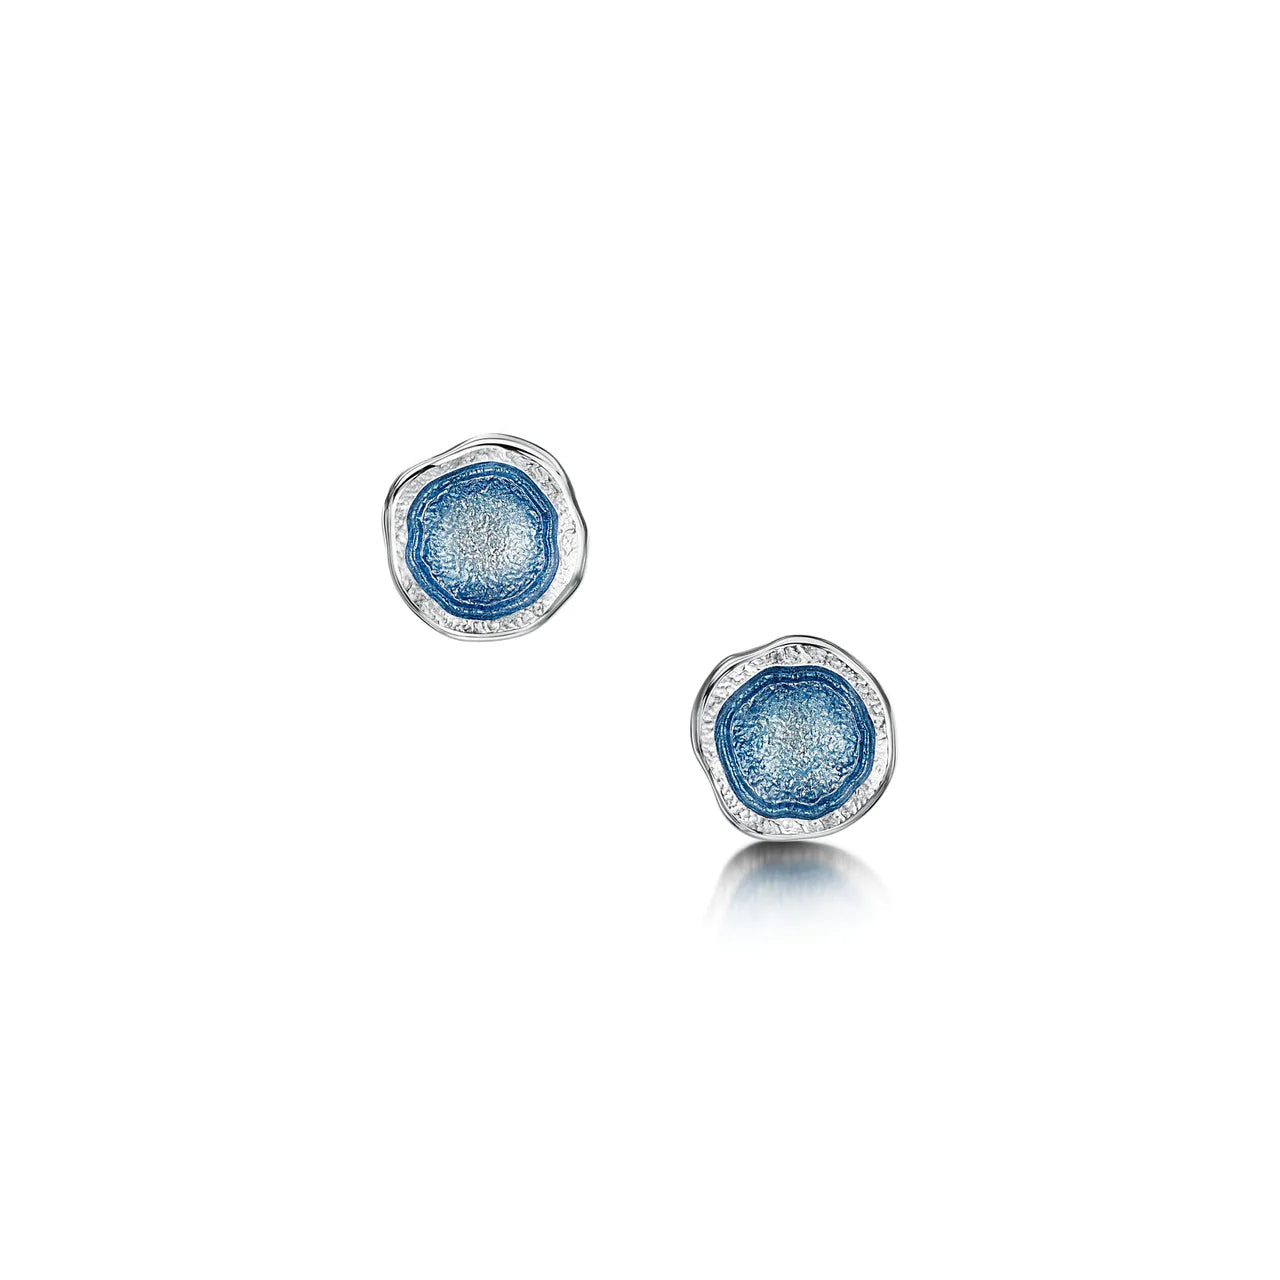 Small silver stud earrings in an irregular, organic shape with subtle texture and blue enamelled centres